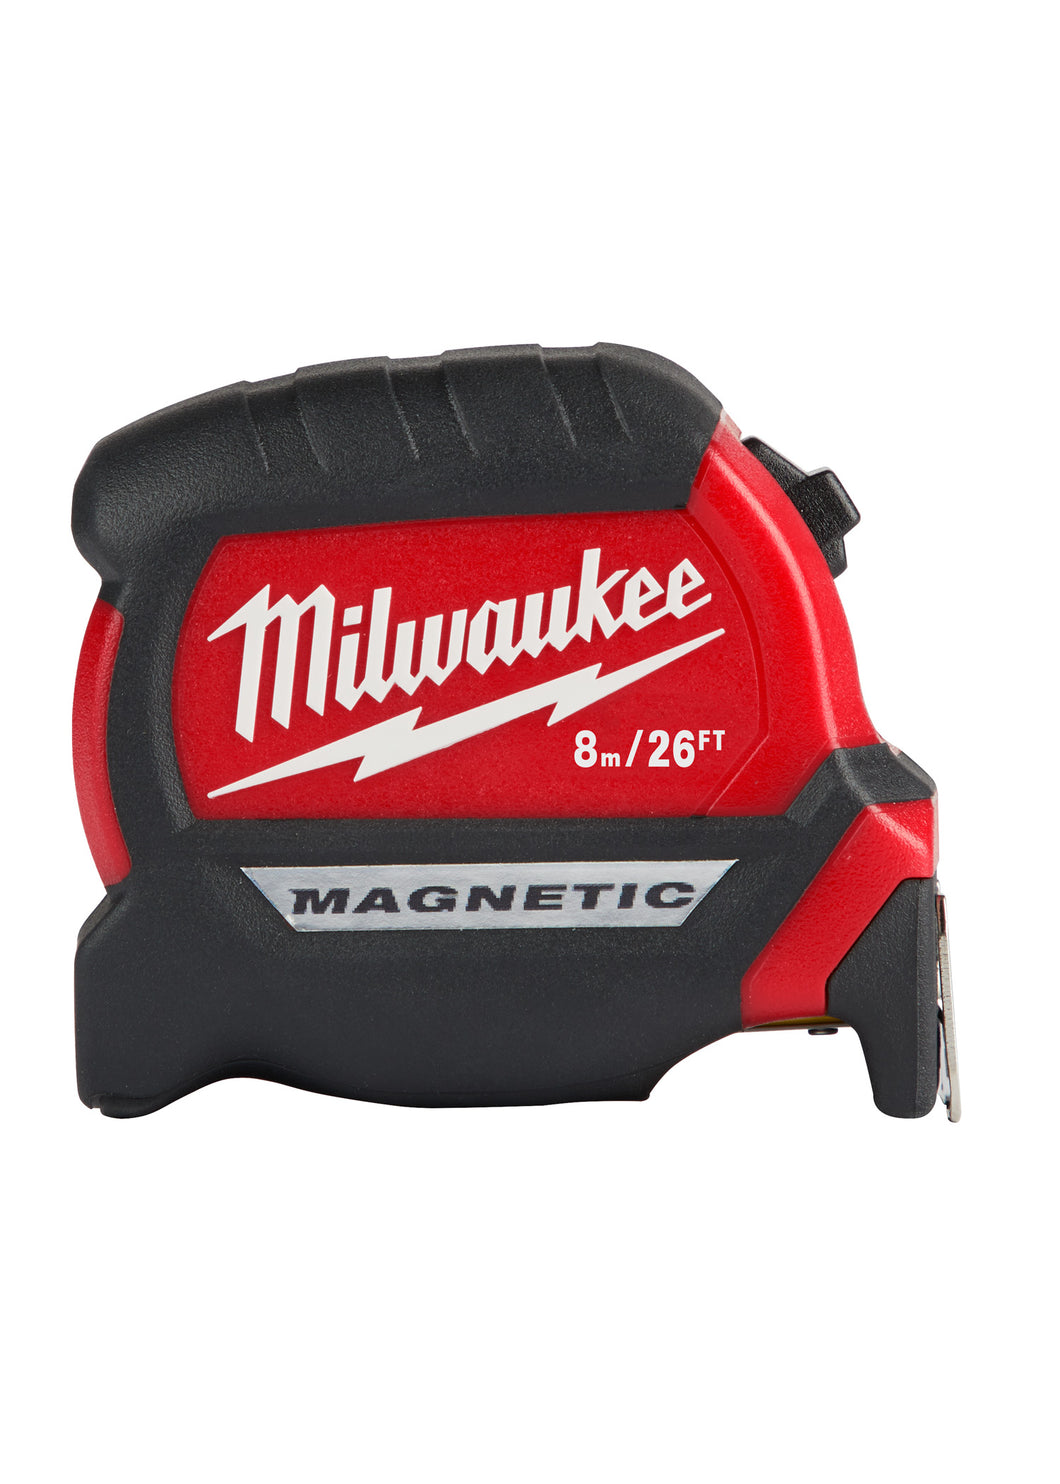 MILWAUKEE Compact Wide Blade Magnetic Tape Measures